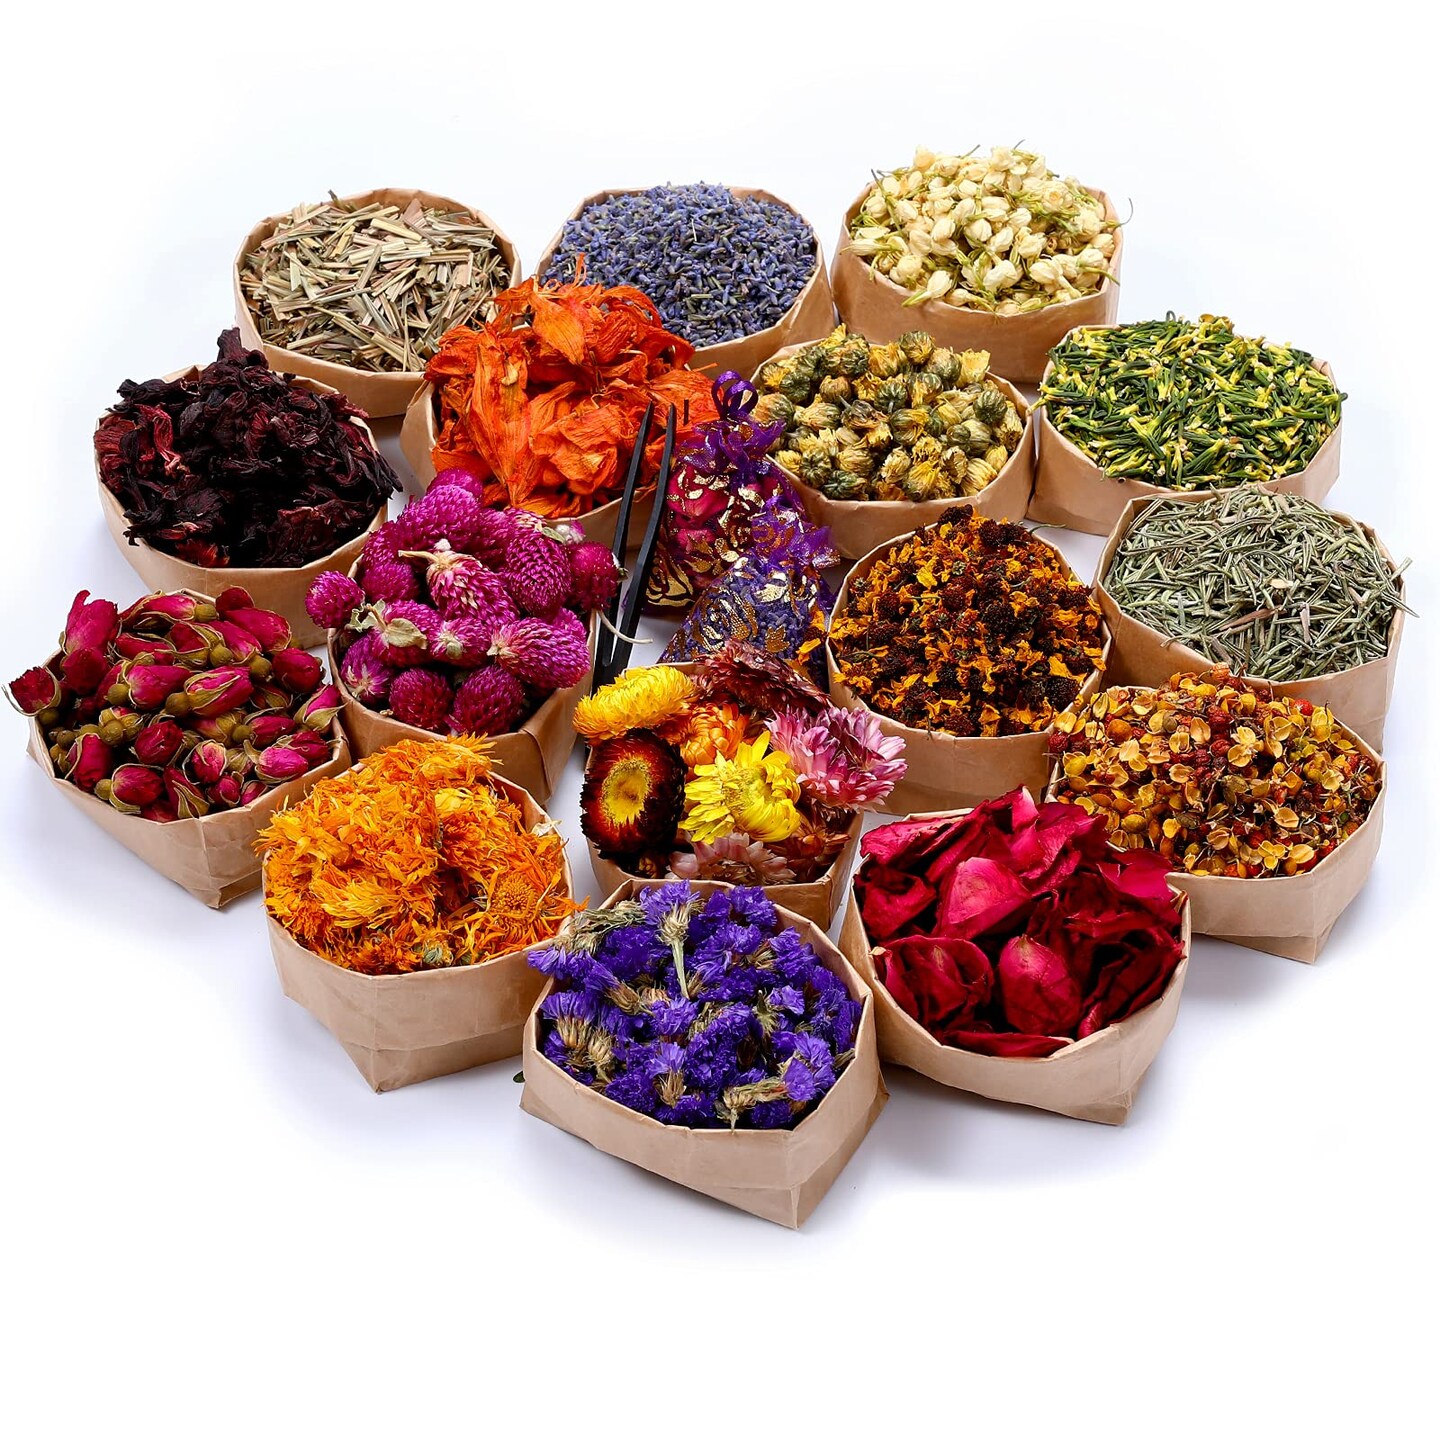 16 Bags Dried Flowers,100% Natural Dried Flowers Herbs Kit for Soap Making, DIY Candle Making,Bath - Include Rose Petals,Lavender,Don&#x27;t Forget Me,Lilium,Jasmine,Rosebudsand More